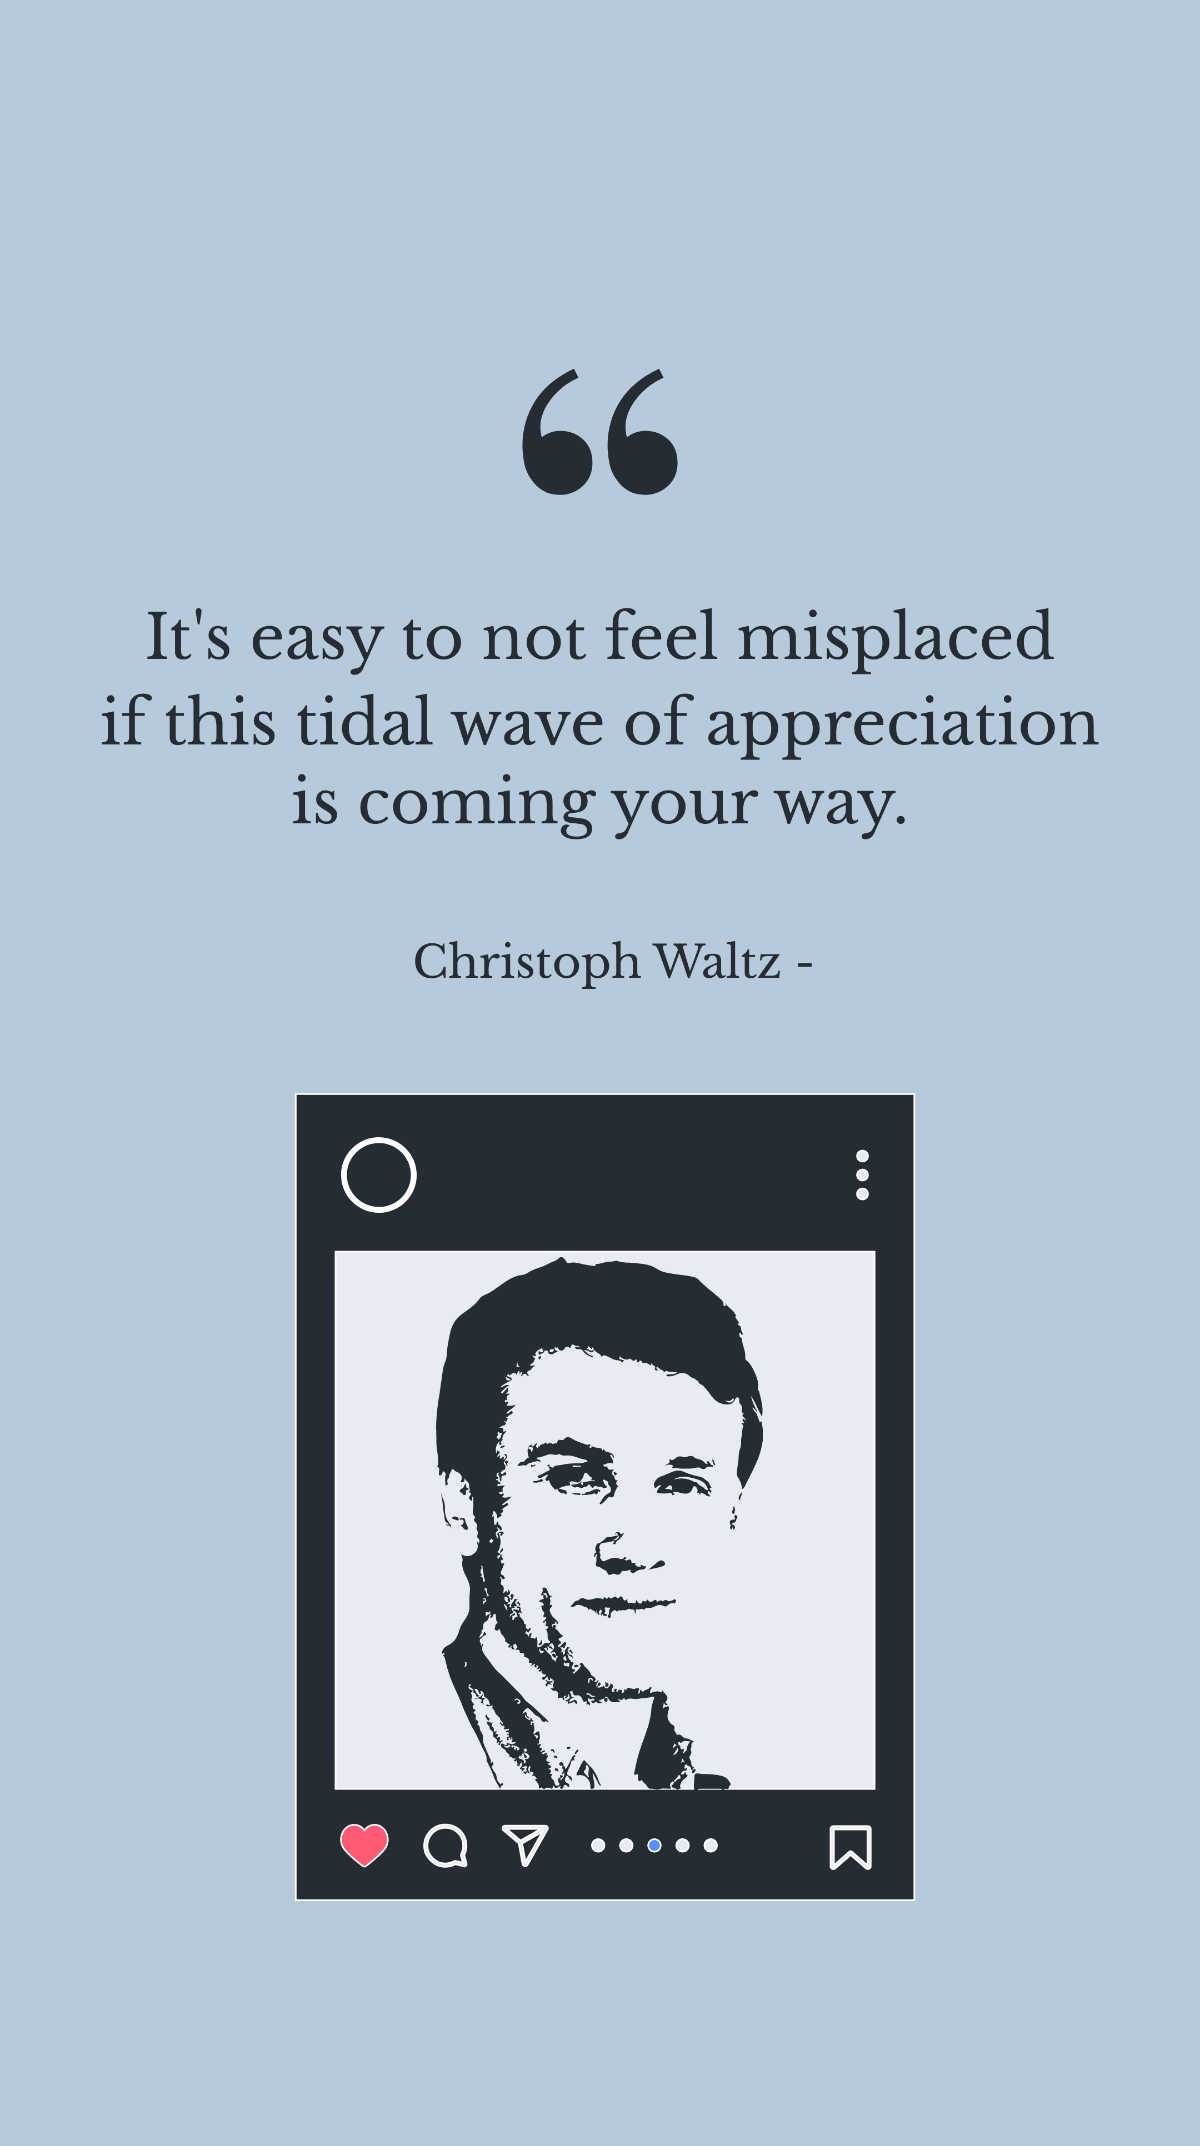 Christoph Waltz - It's easy to not feel misplaced if this tidal wave of appreciation is coming your way.